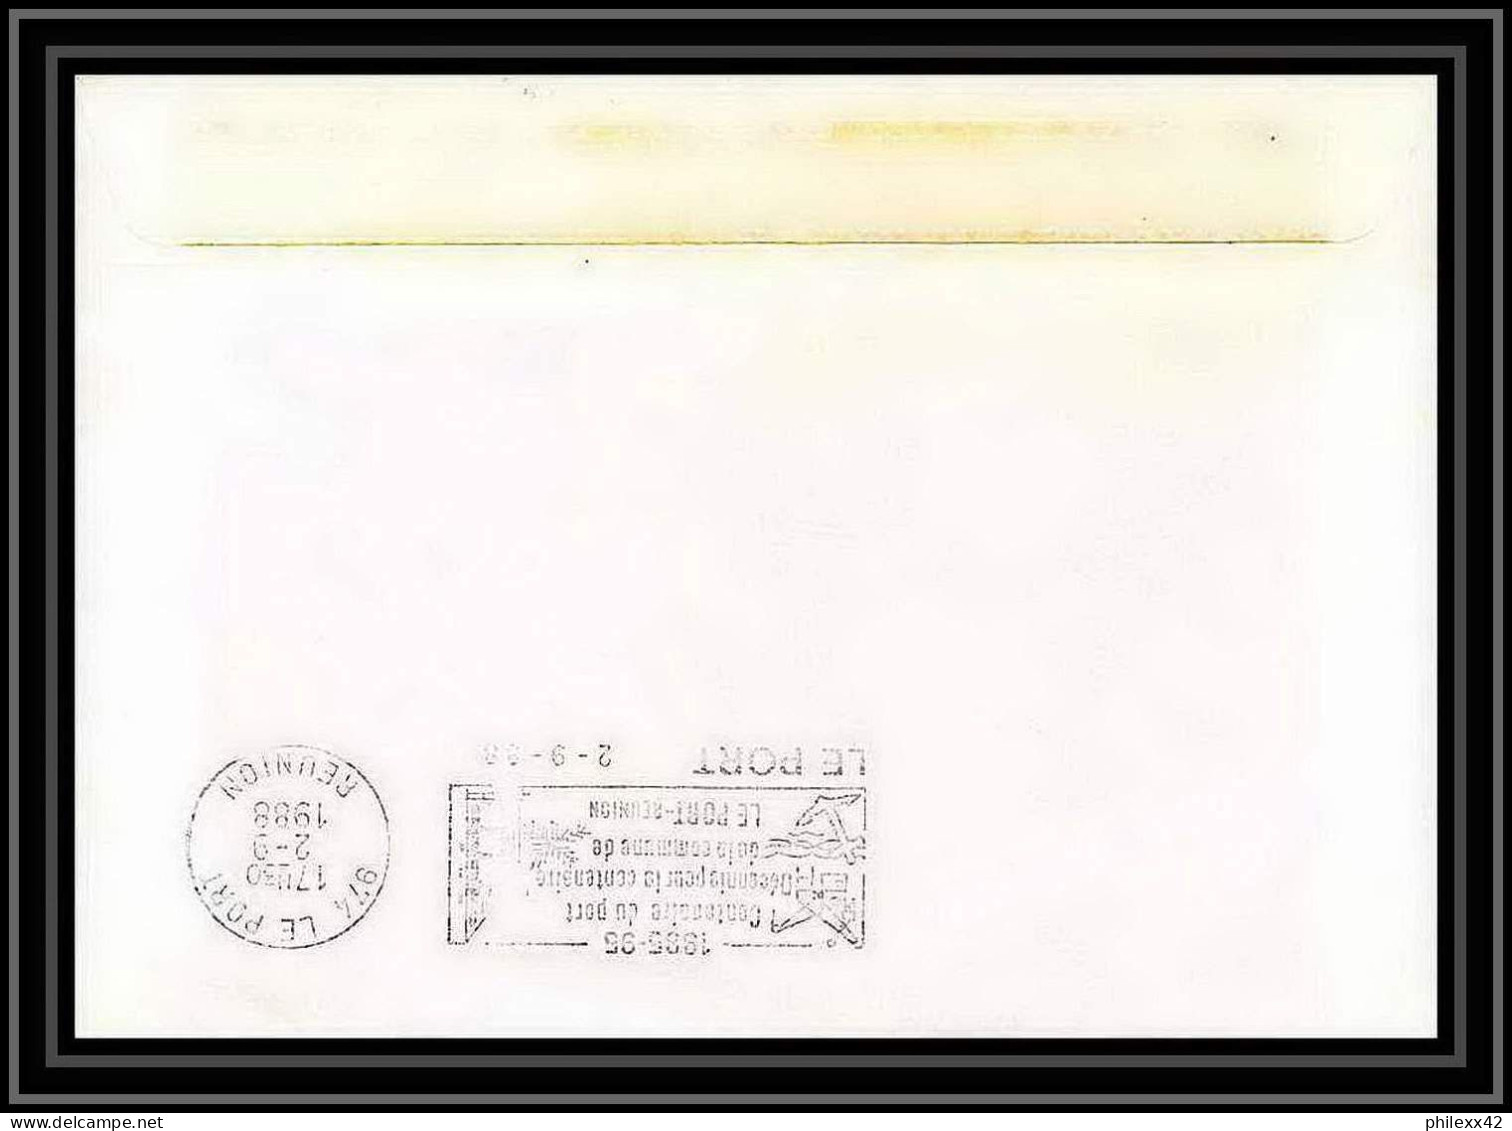 1567 TAAF Terres Australes Lettre (cover) Md 59 Fournaise La Reunion Signé Signed Marion Dufresne 2/9/1988 Obl Paquebot  - Antarktis-Expeditionen